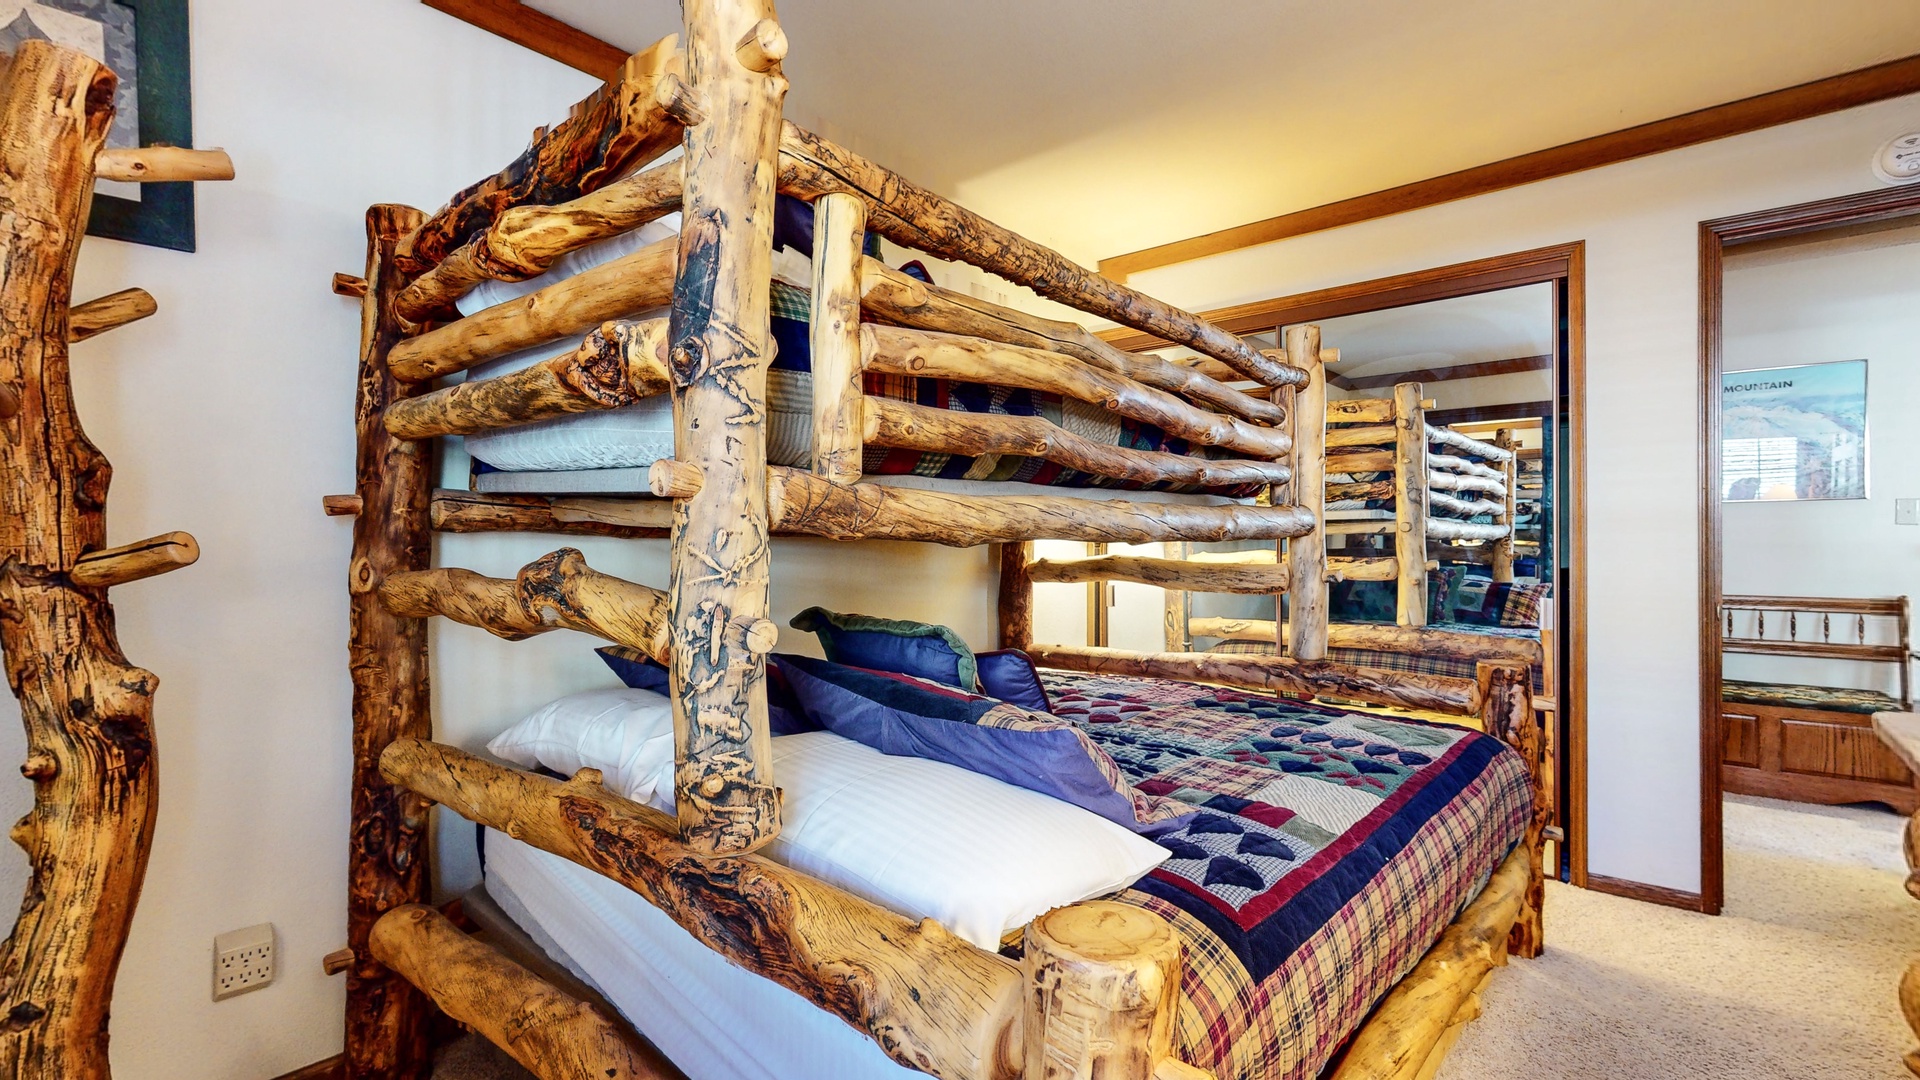 The second bedrooms offers a twin/queen bunk bed and Smart TV